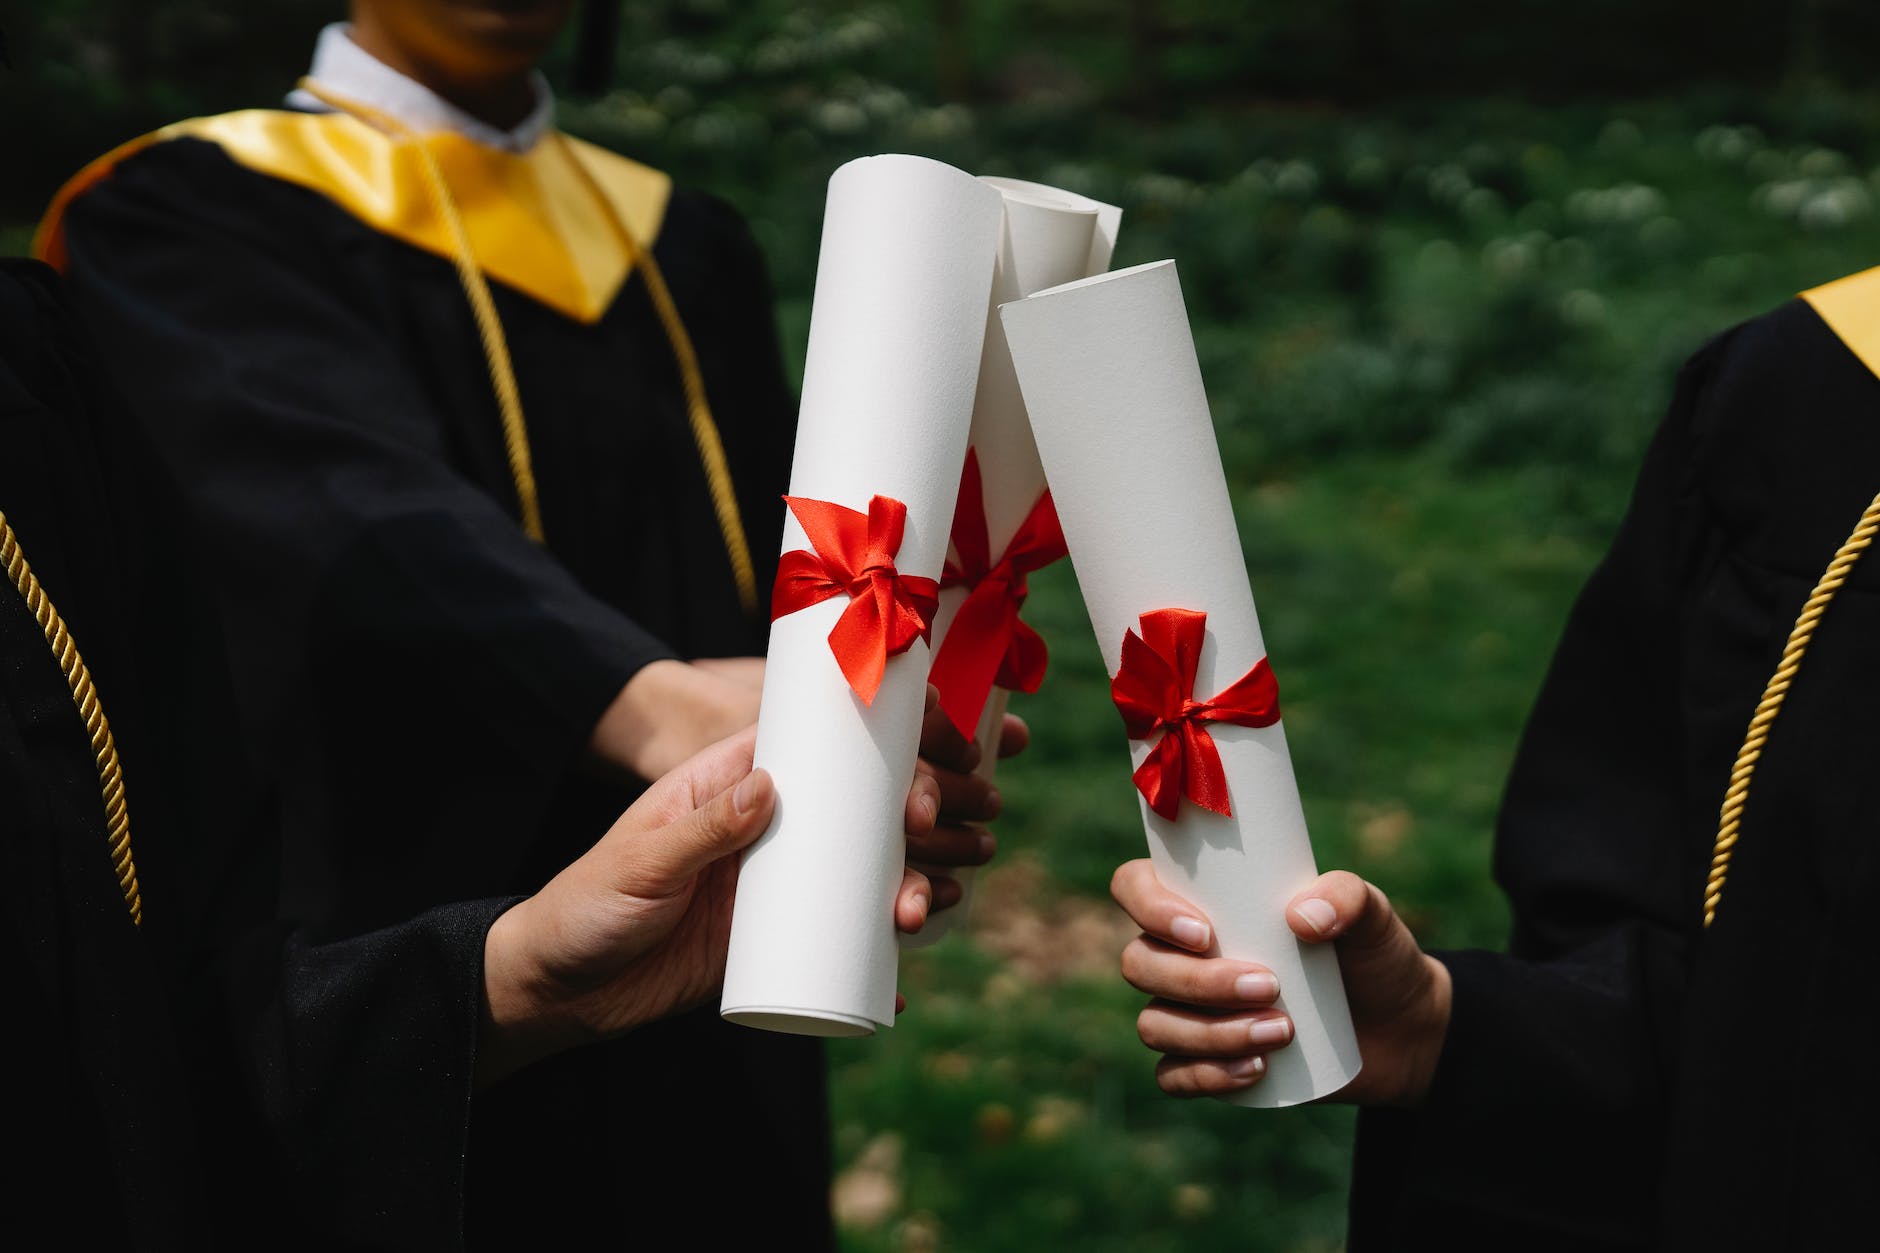 photograph of people s hands holding white diplomas